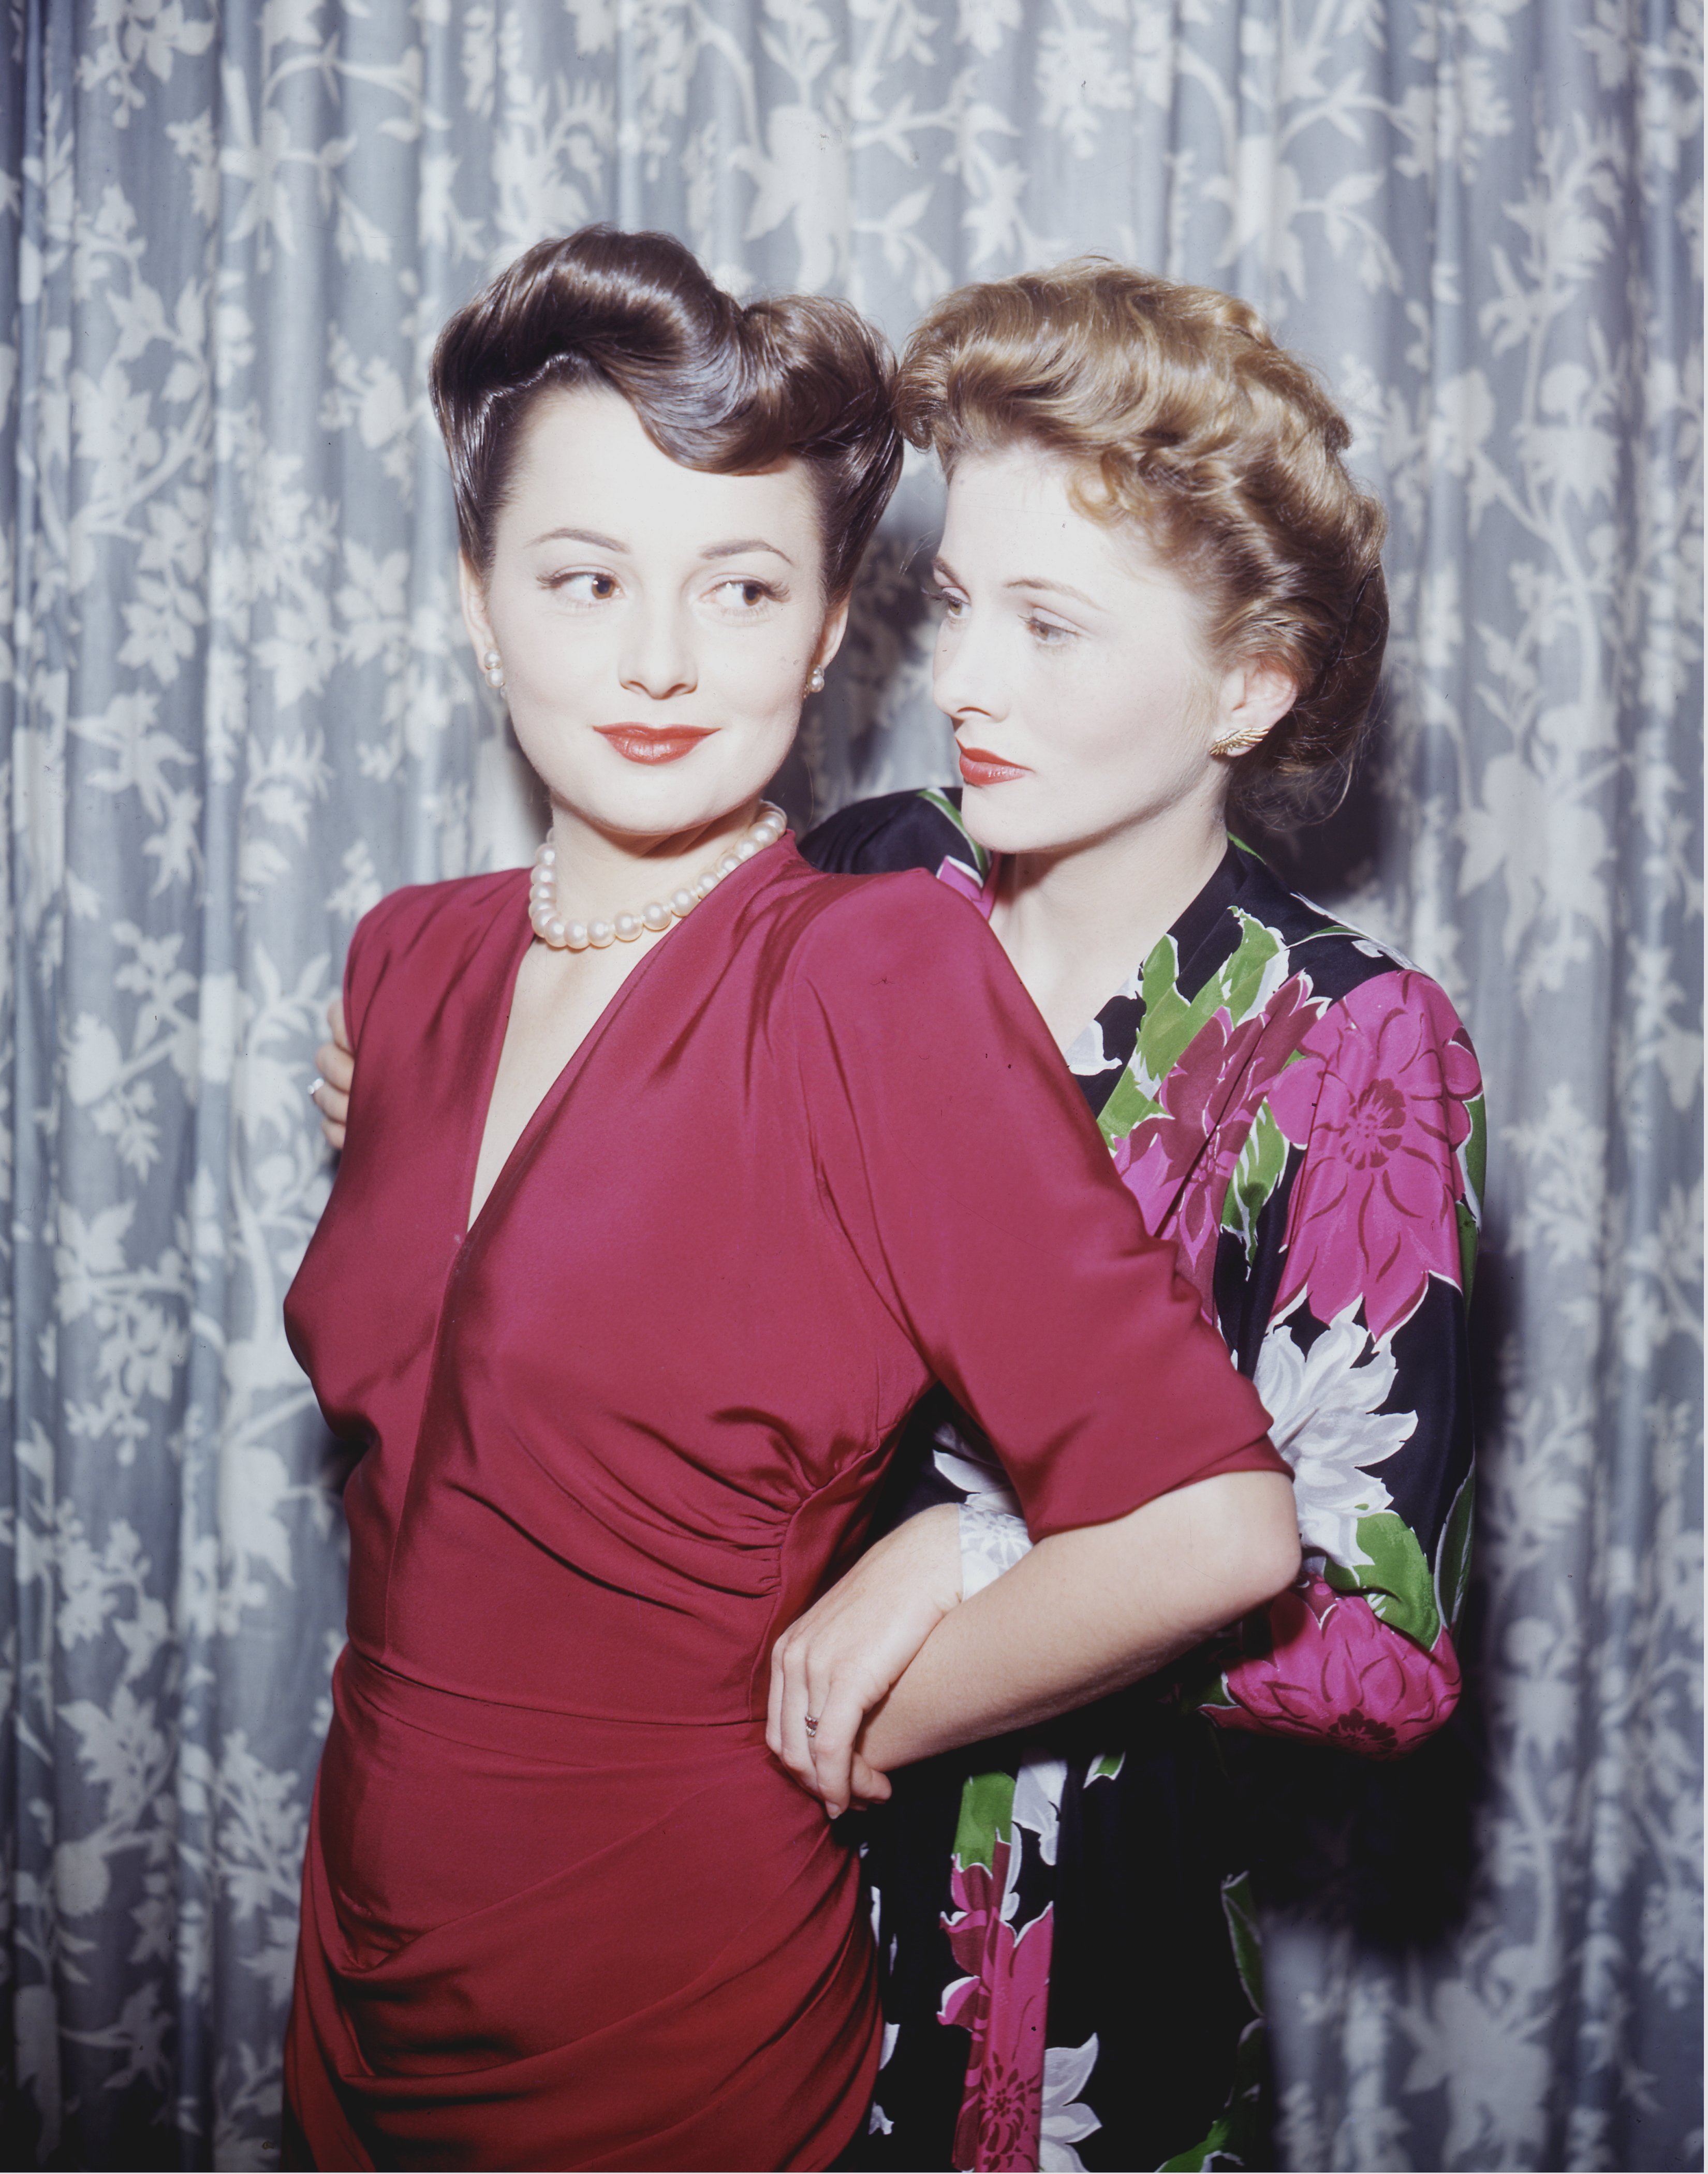 Olivia De Havilland and Joan Fontaine photographed in 1945. | Source: Getty Images